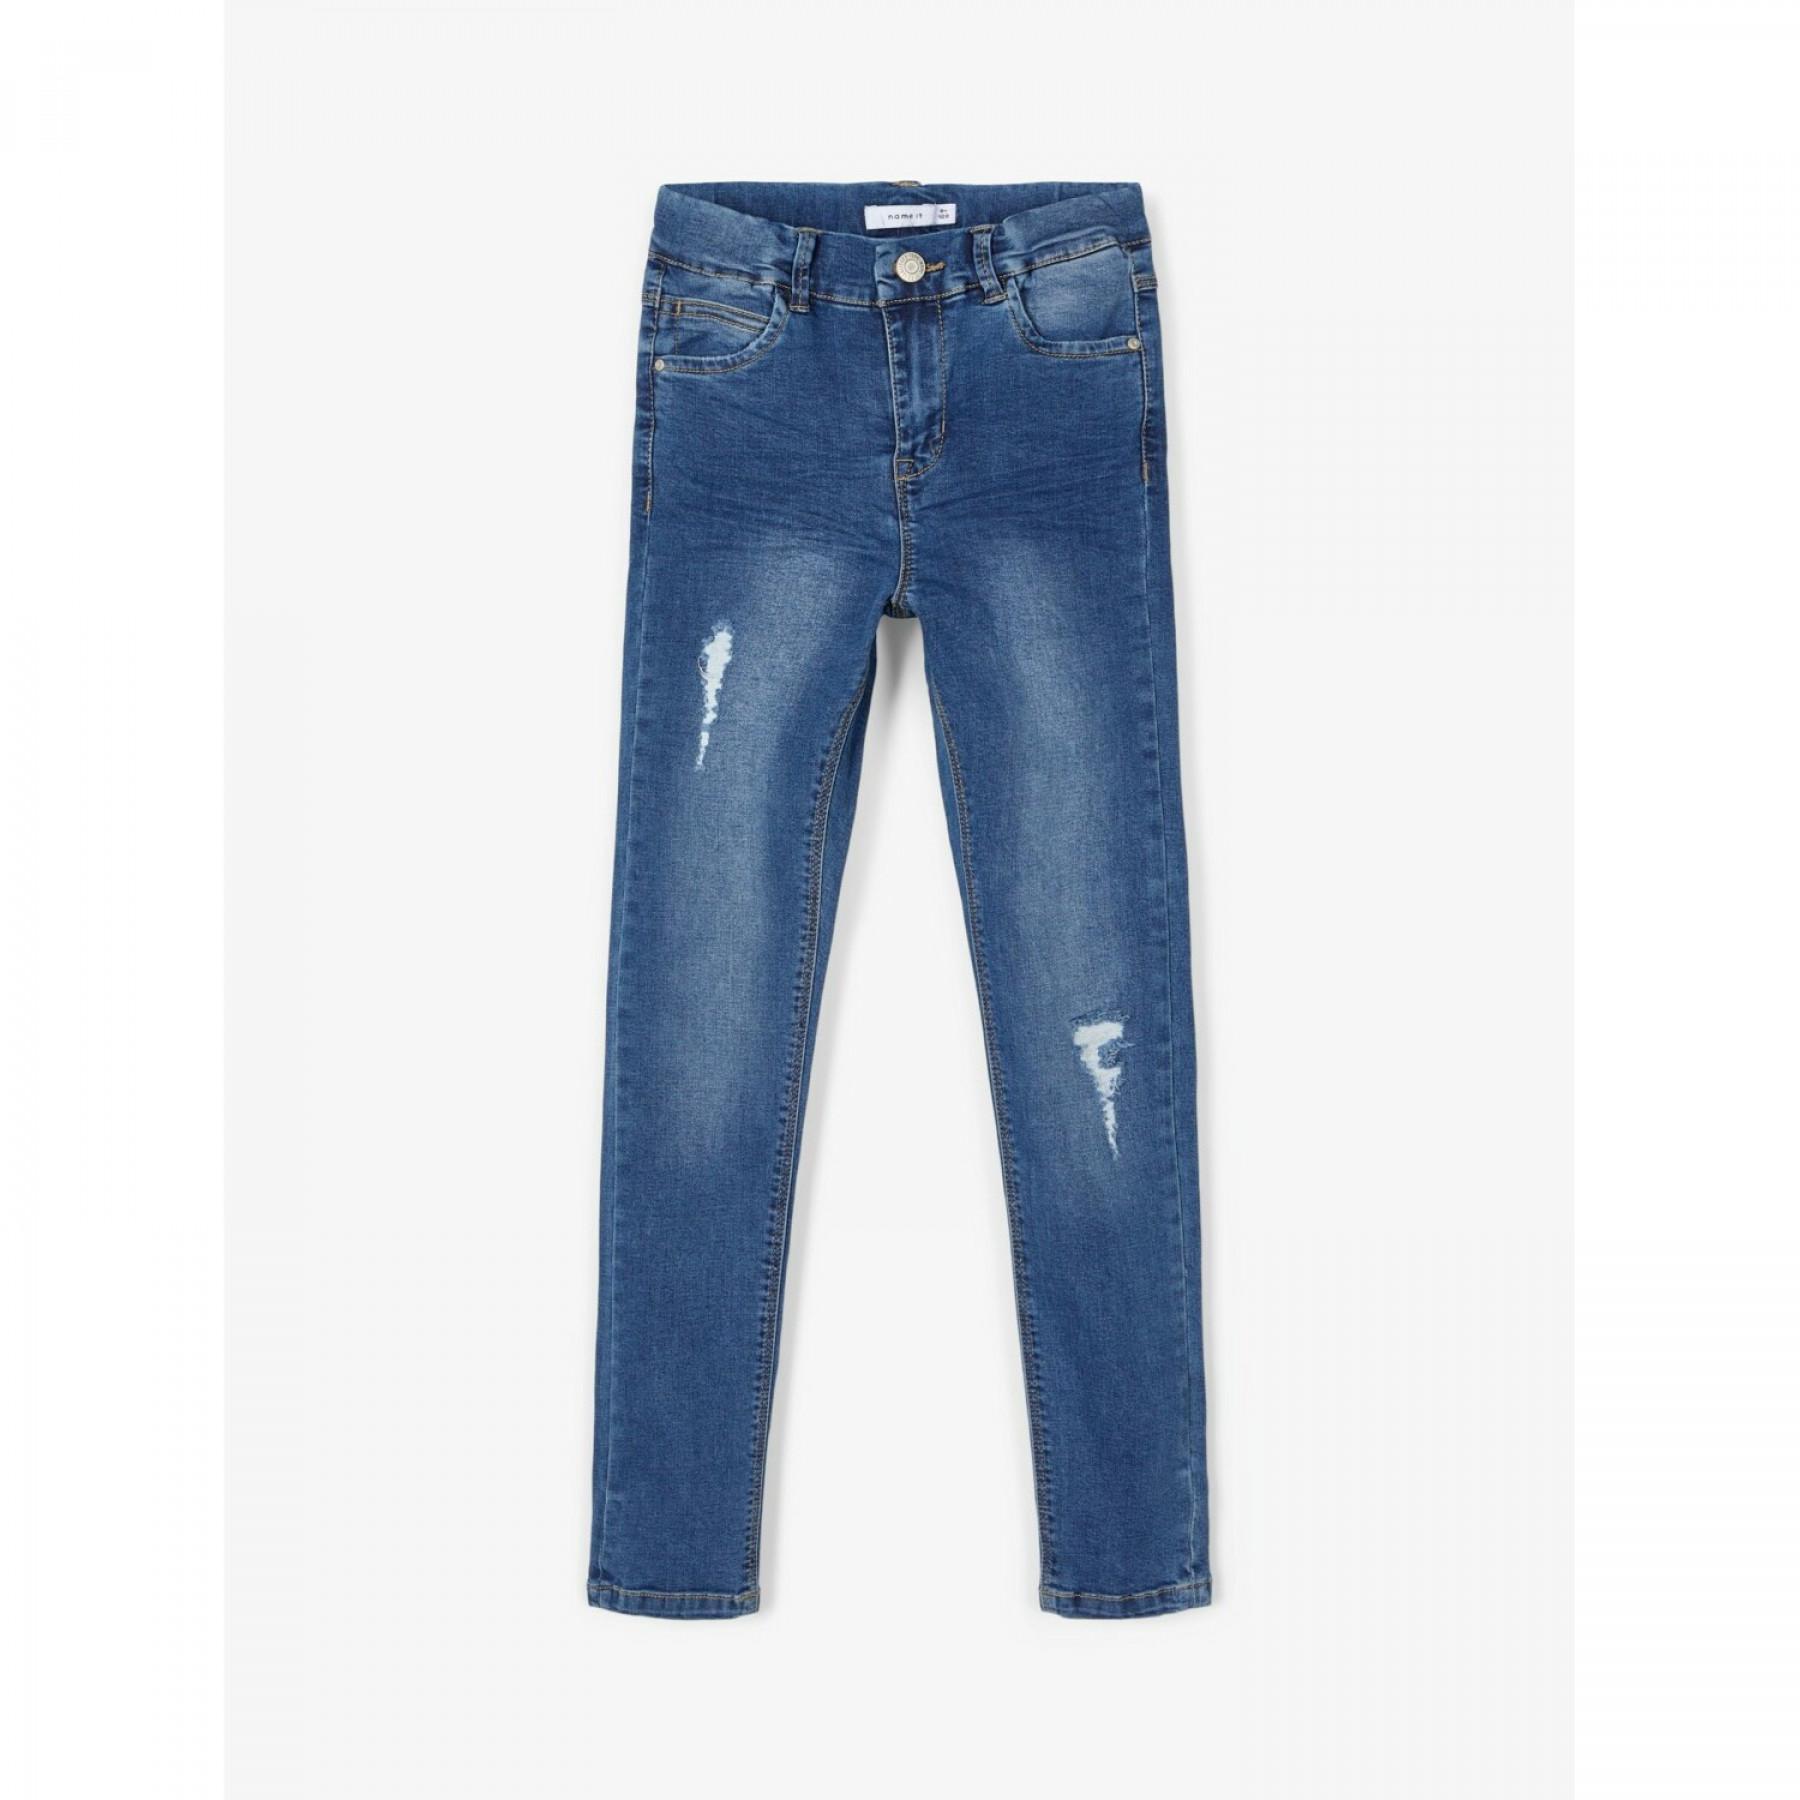 High waist skinny jeans for girls Name it Polly